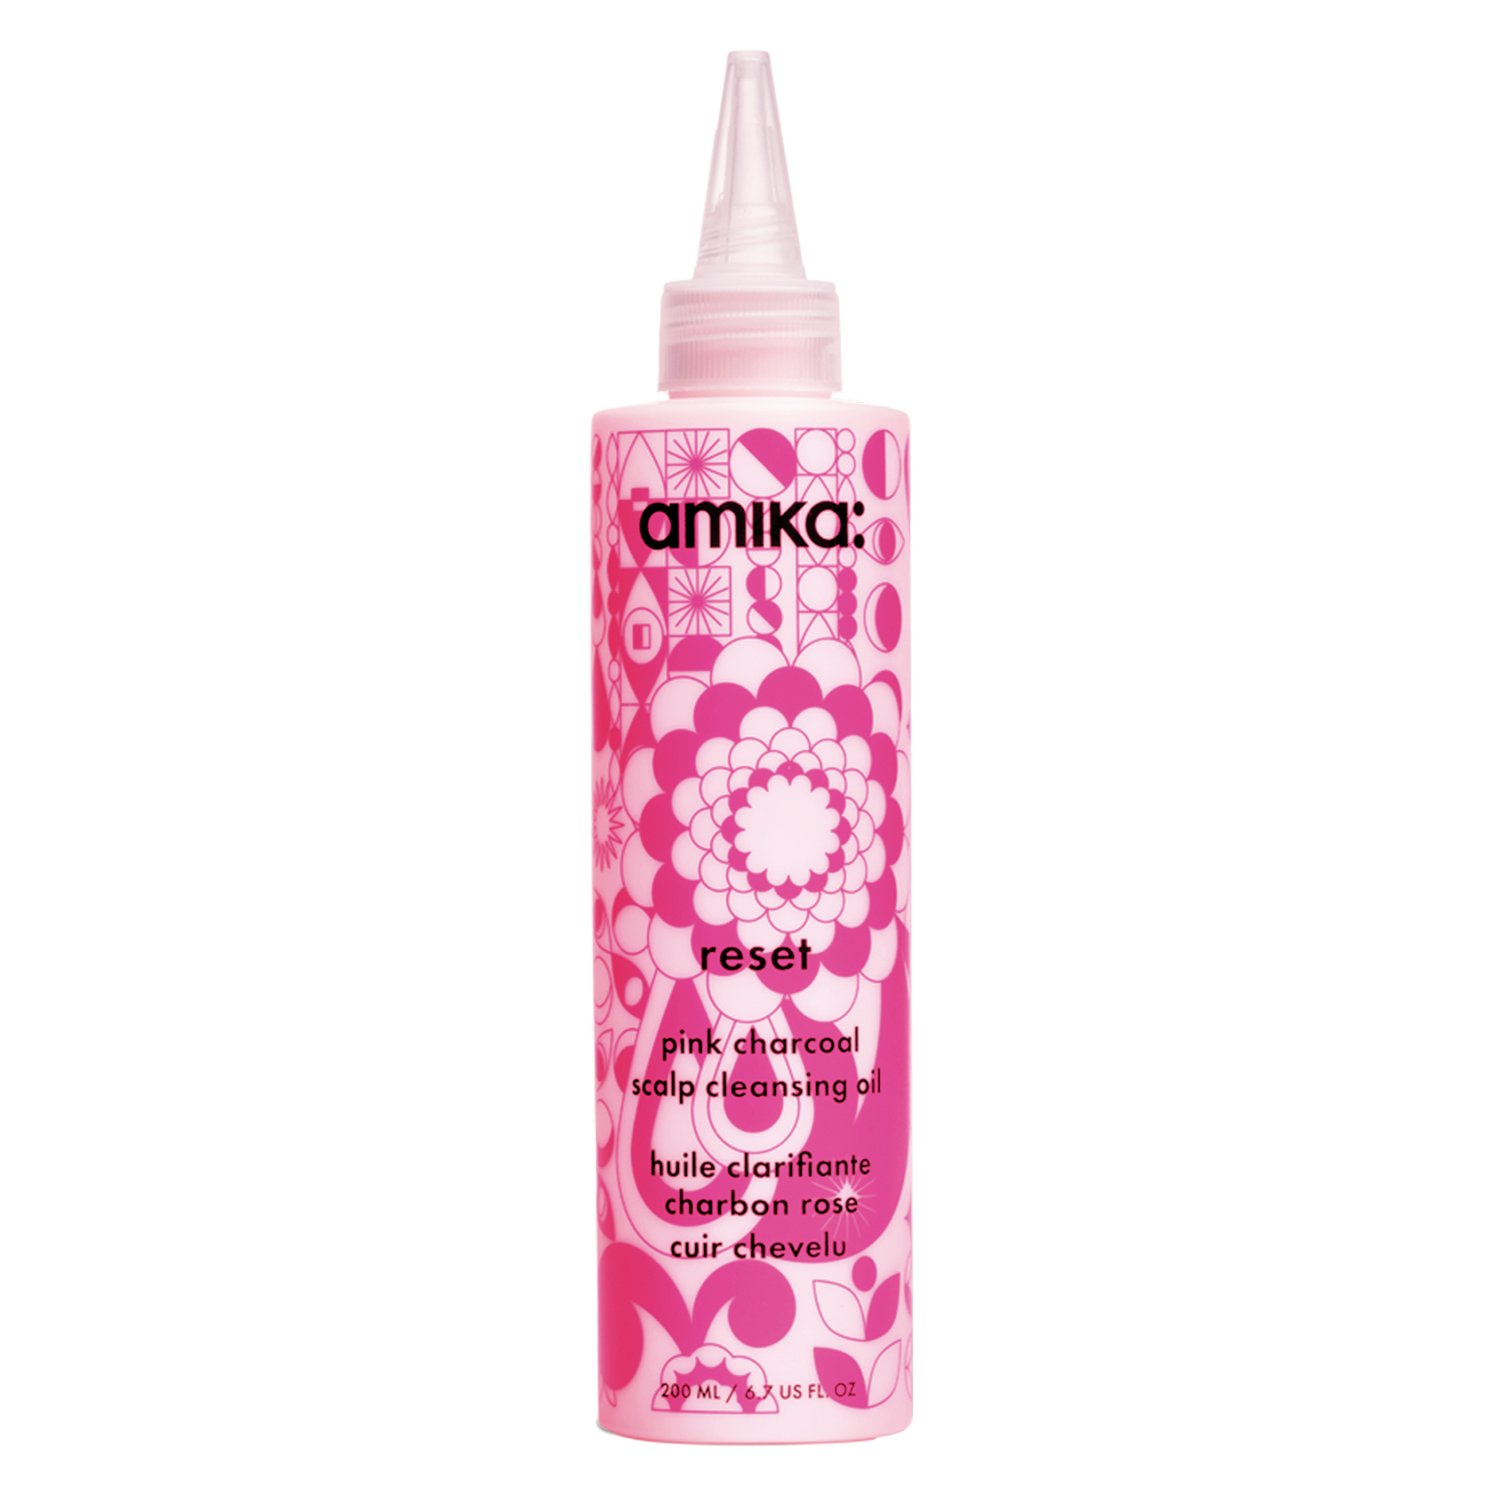 amika RESET pink charcoal scalp cleansing oil amika RESET pink charcoal scalp cleansing oil 1